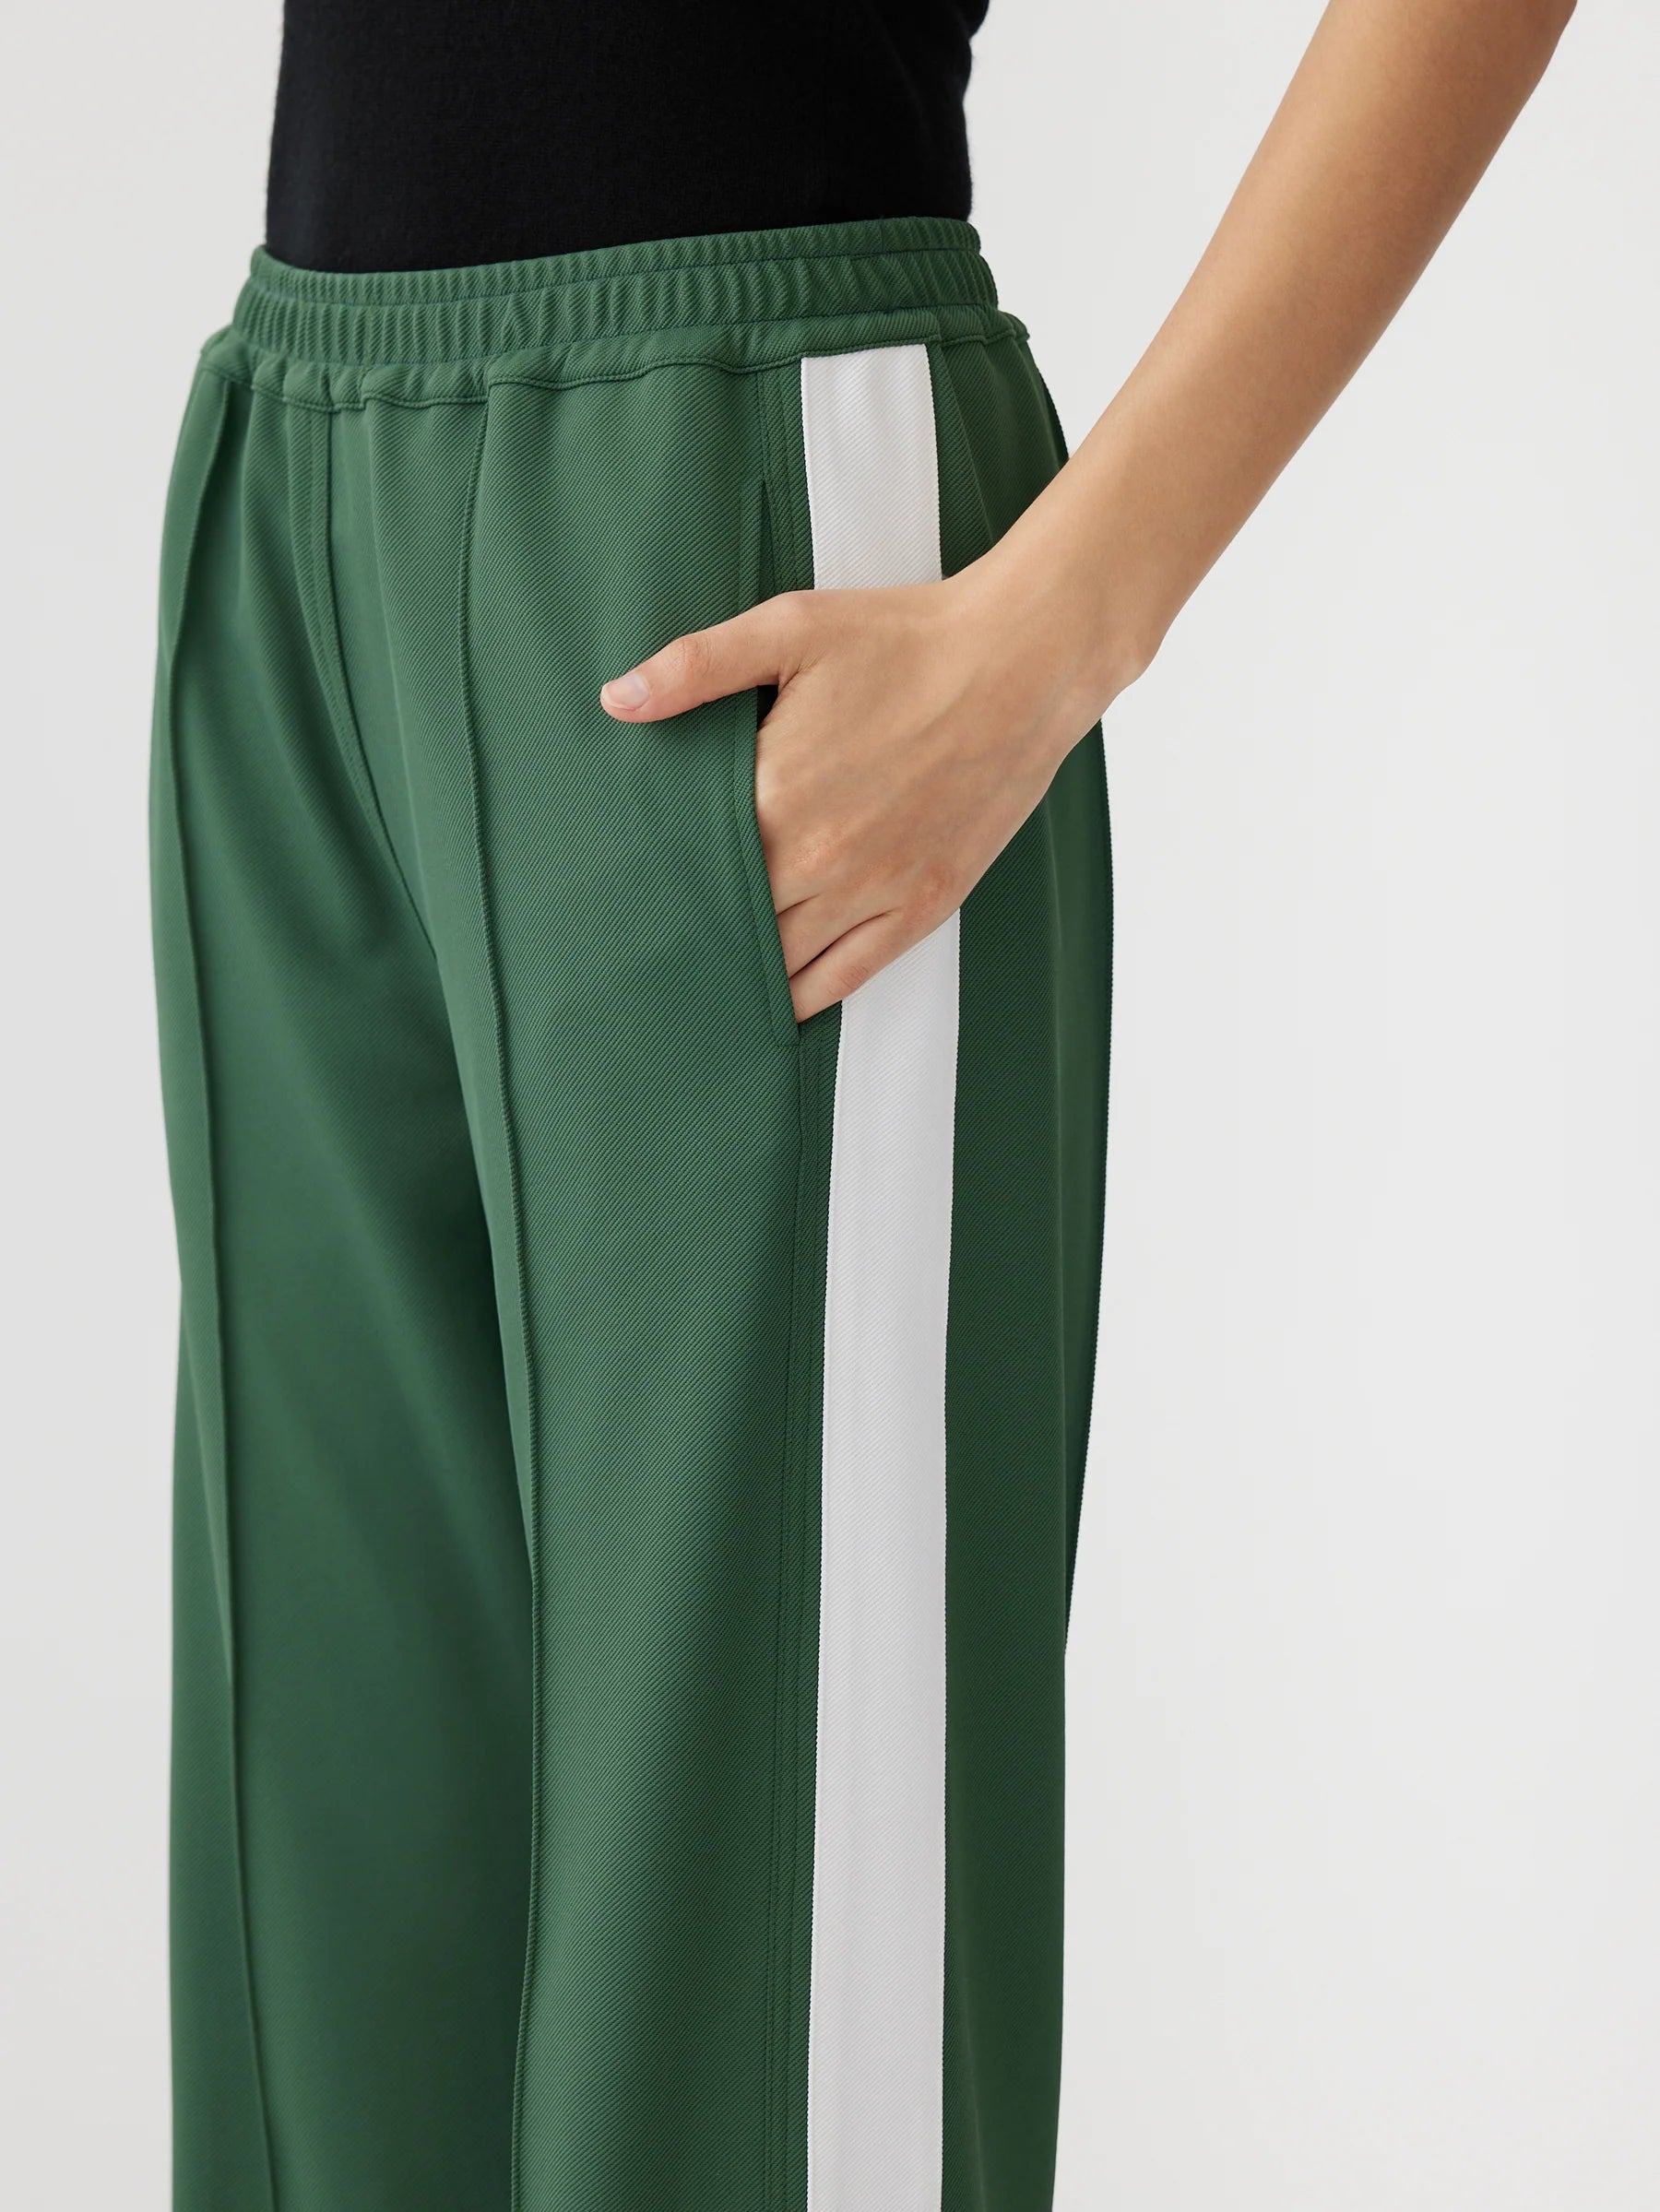 Twill Stripe Detail Pant in Athletic Green/White